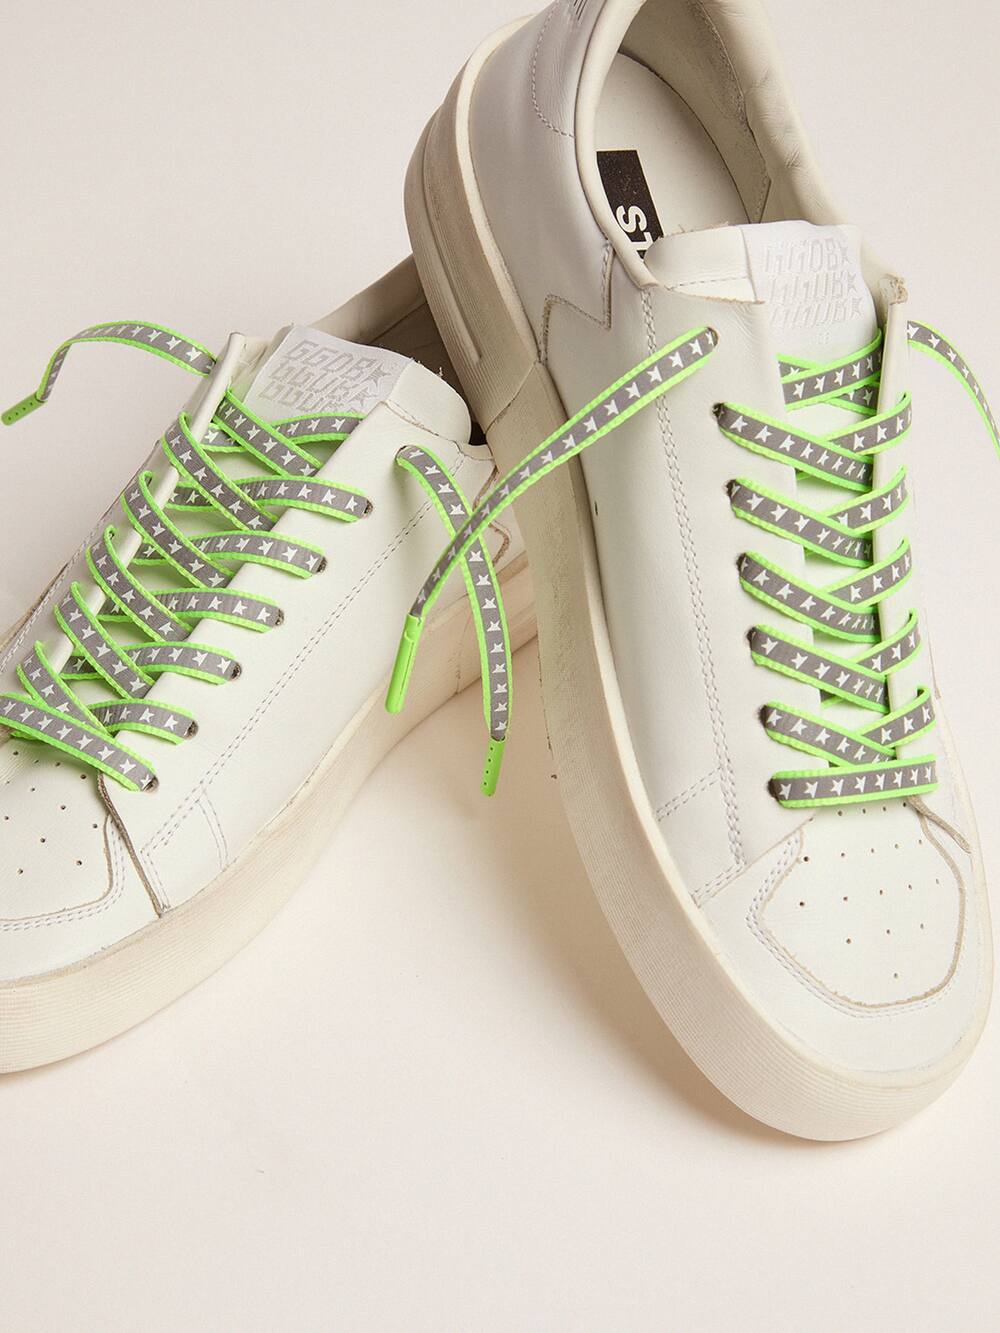 Golden Goose - Men's neon green reflective laces with stars in 